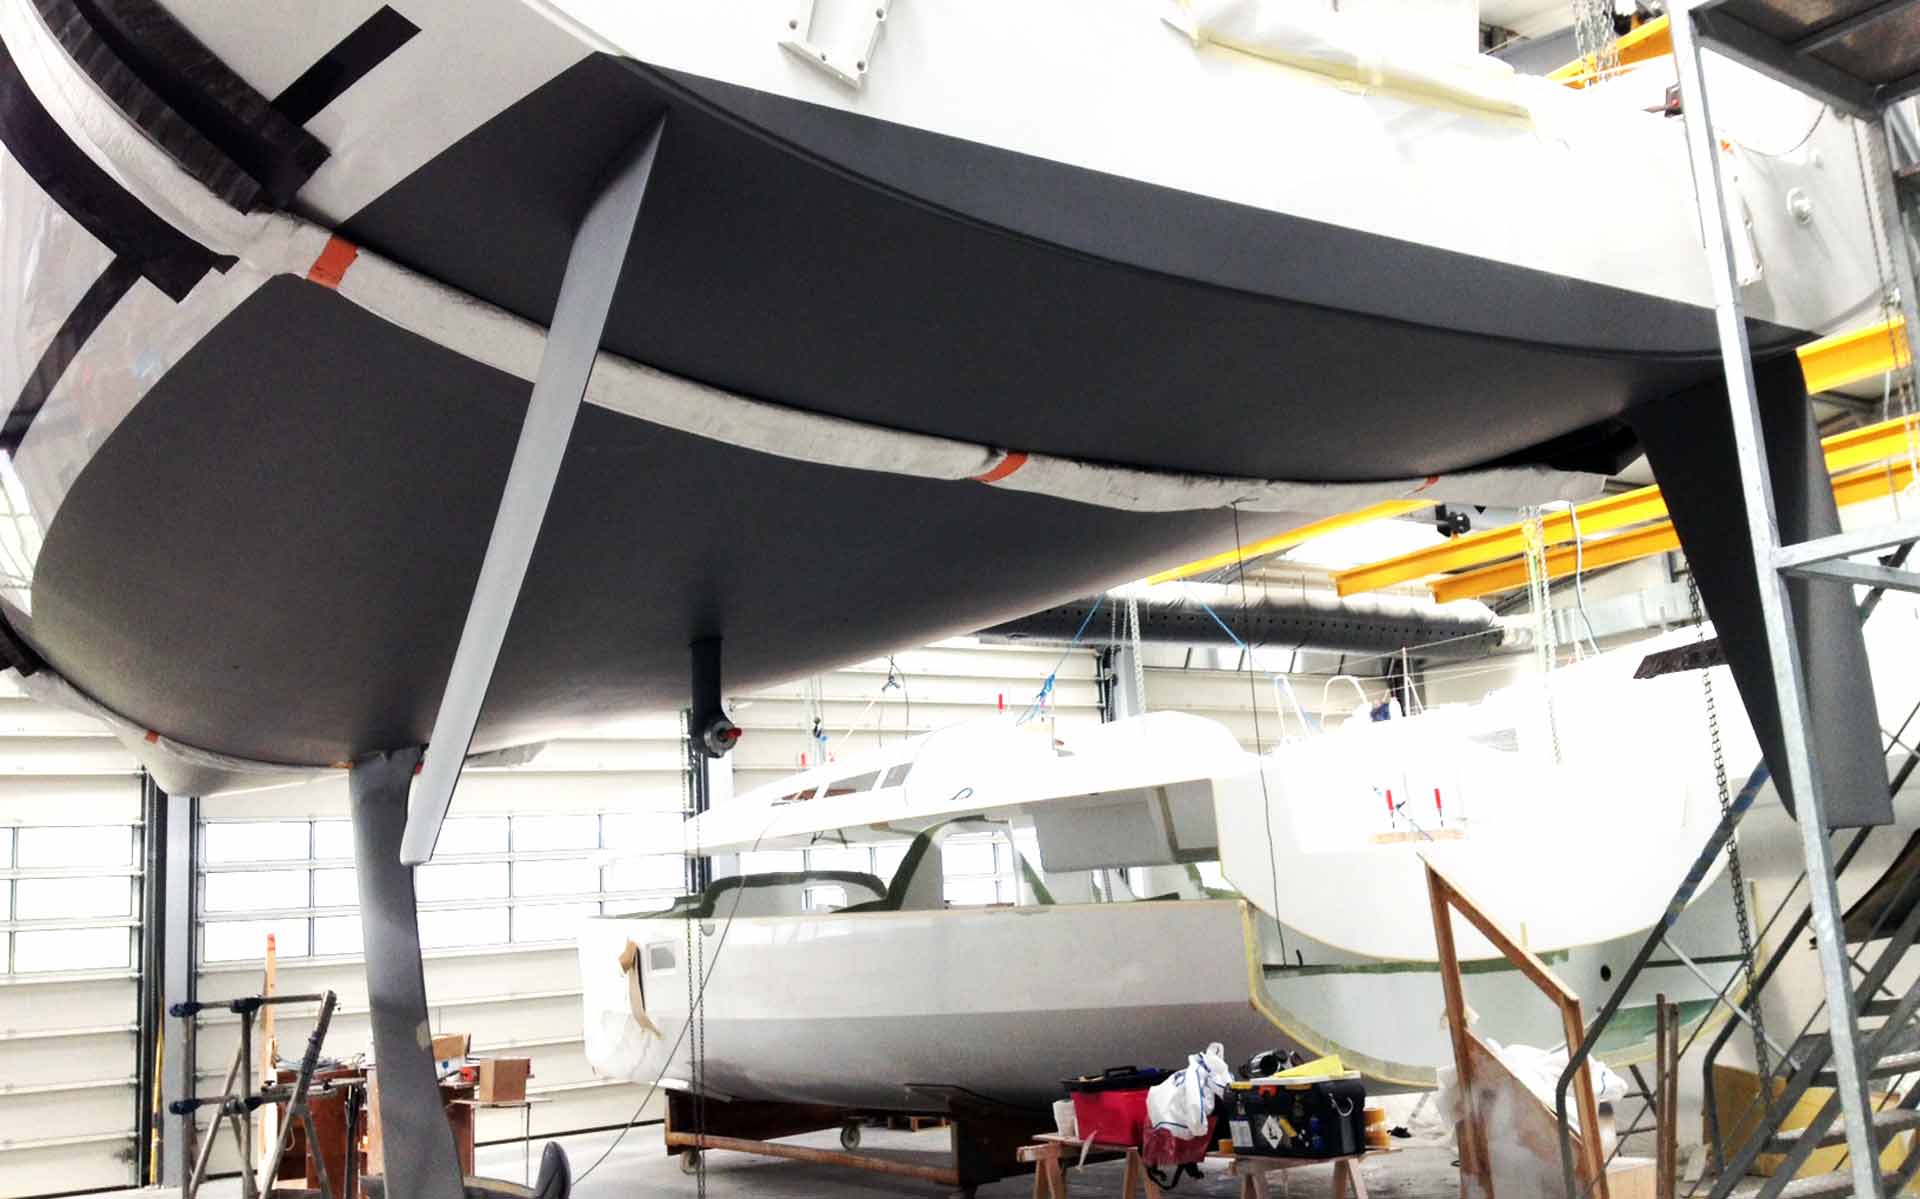 Flat bottomed hull & light weight - the secret of gliding